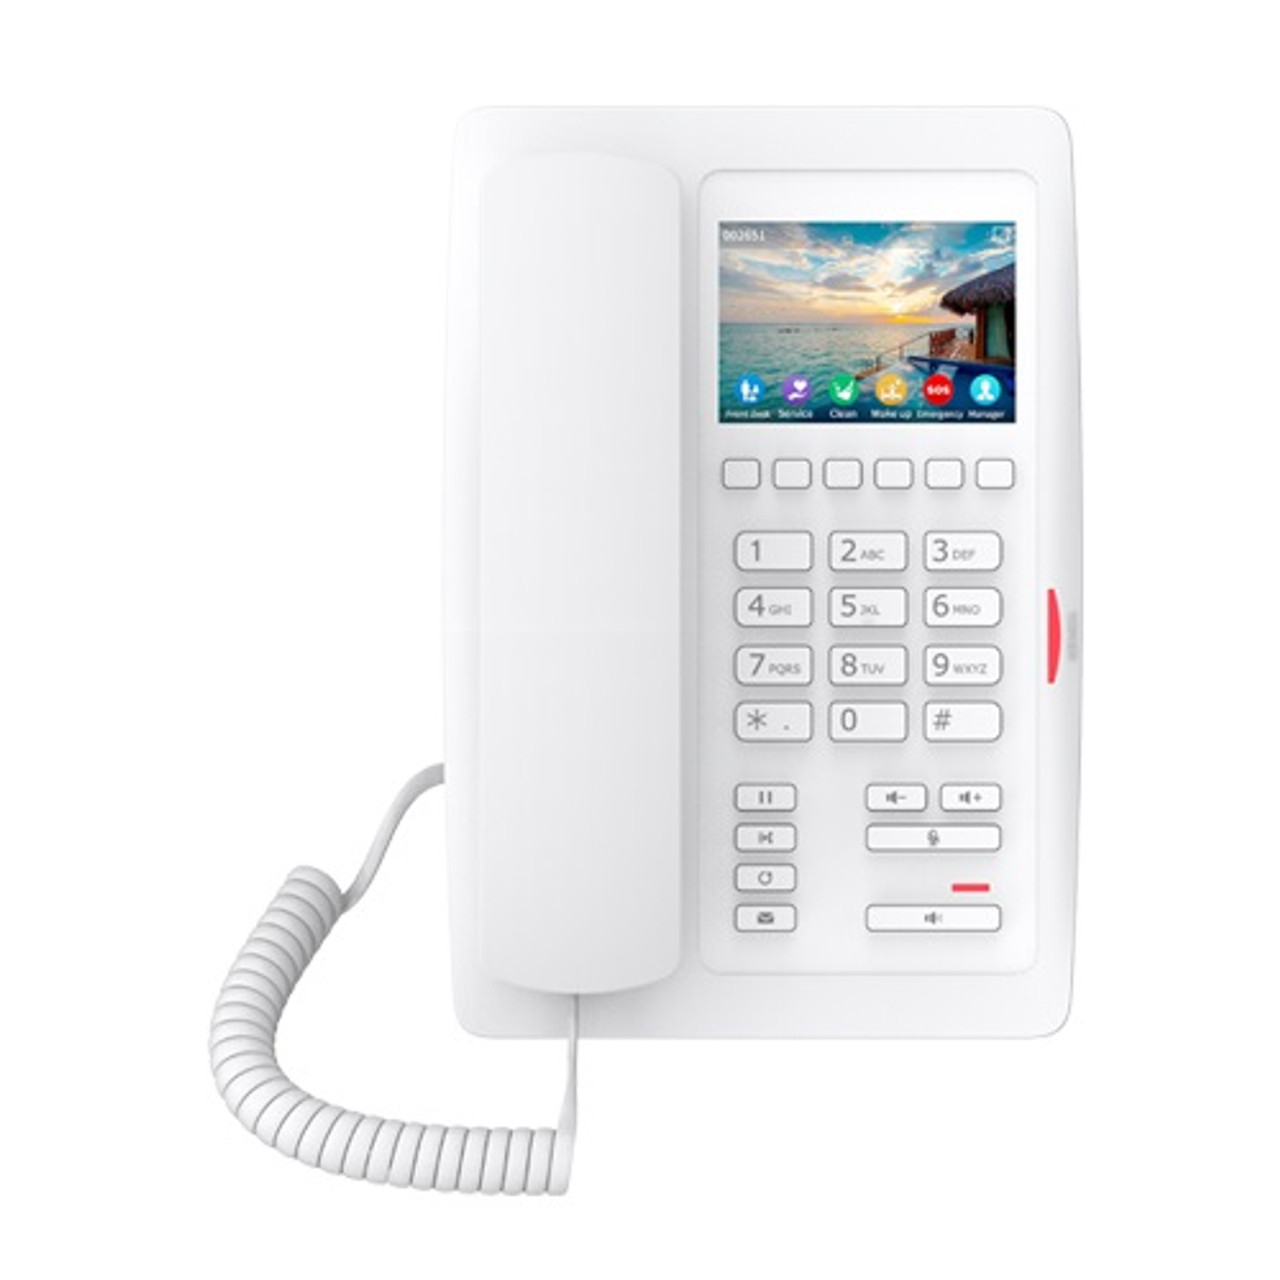 Fanvil H5W White WiFi IP Phone
As a WiFi IP phone with HD audio, Fanvil H5W can deliver you a smoother communication experience with HD audio and no cabling troubles. Fanvil H5W supports H.264 video decoding to help owners to view the video image before opening the door. More than a hotel IP phone, it is also suitable for the supermarket, hospital, shopping mall, etc.


Fanvil H5W Hotel IP Phone Features:
Black and White
Built-in 2.4G WiFi
Support H.264 Video Decoding
3.5-inch Color Screen
HD Audio with G.722 and Opus
2 SIP Lines
1 USB Port for Phone Charging
6 Programmable Keys for Speed Dial Functions
Support PoE